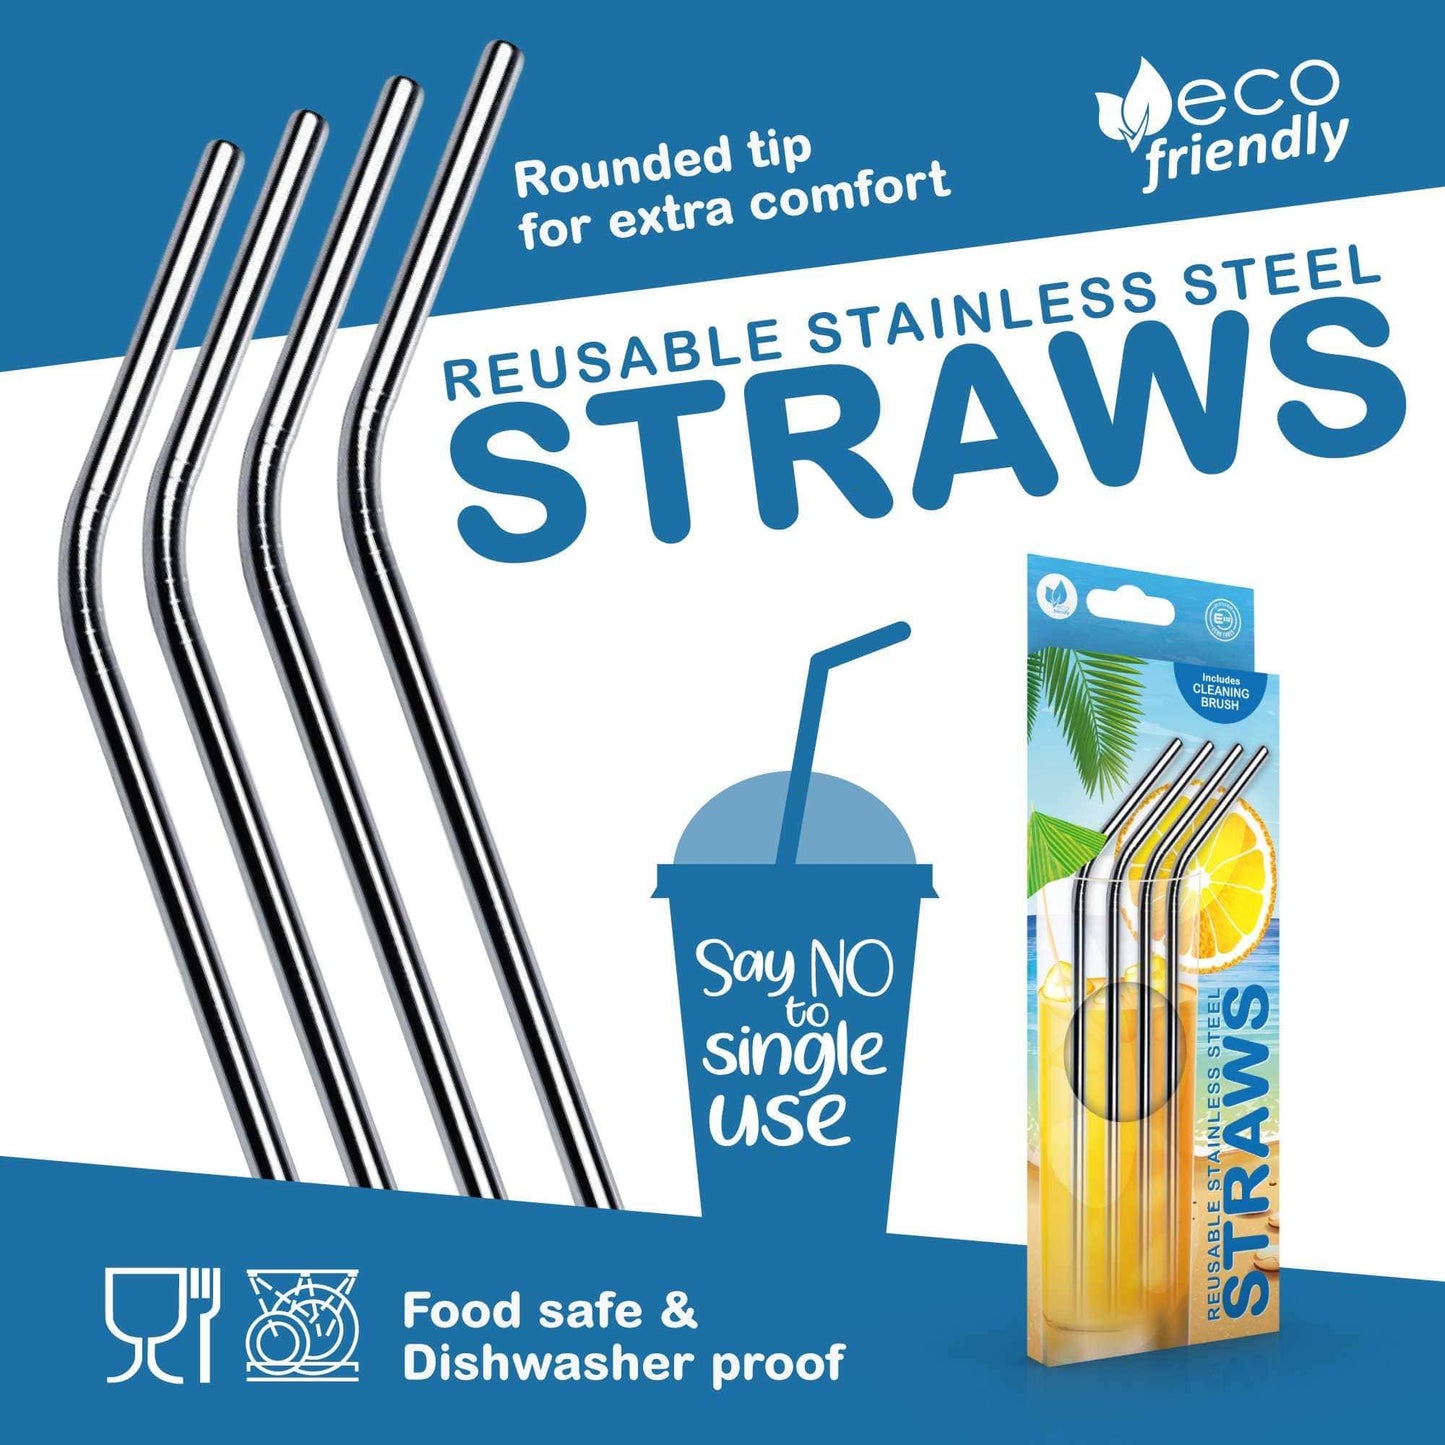 Echo Three Straws Reusable Stainless Steel Straws - Pack of 4 with Cleaning Brush